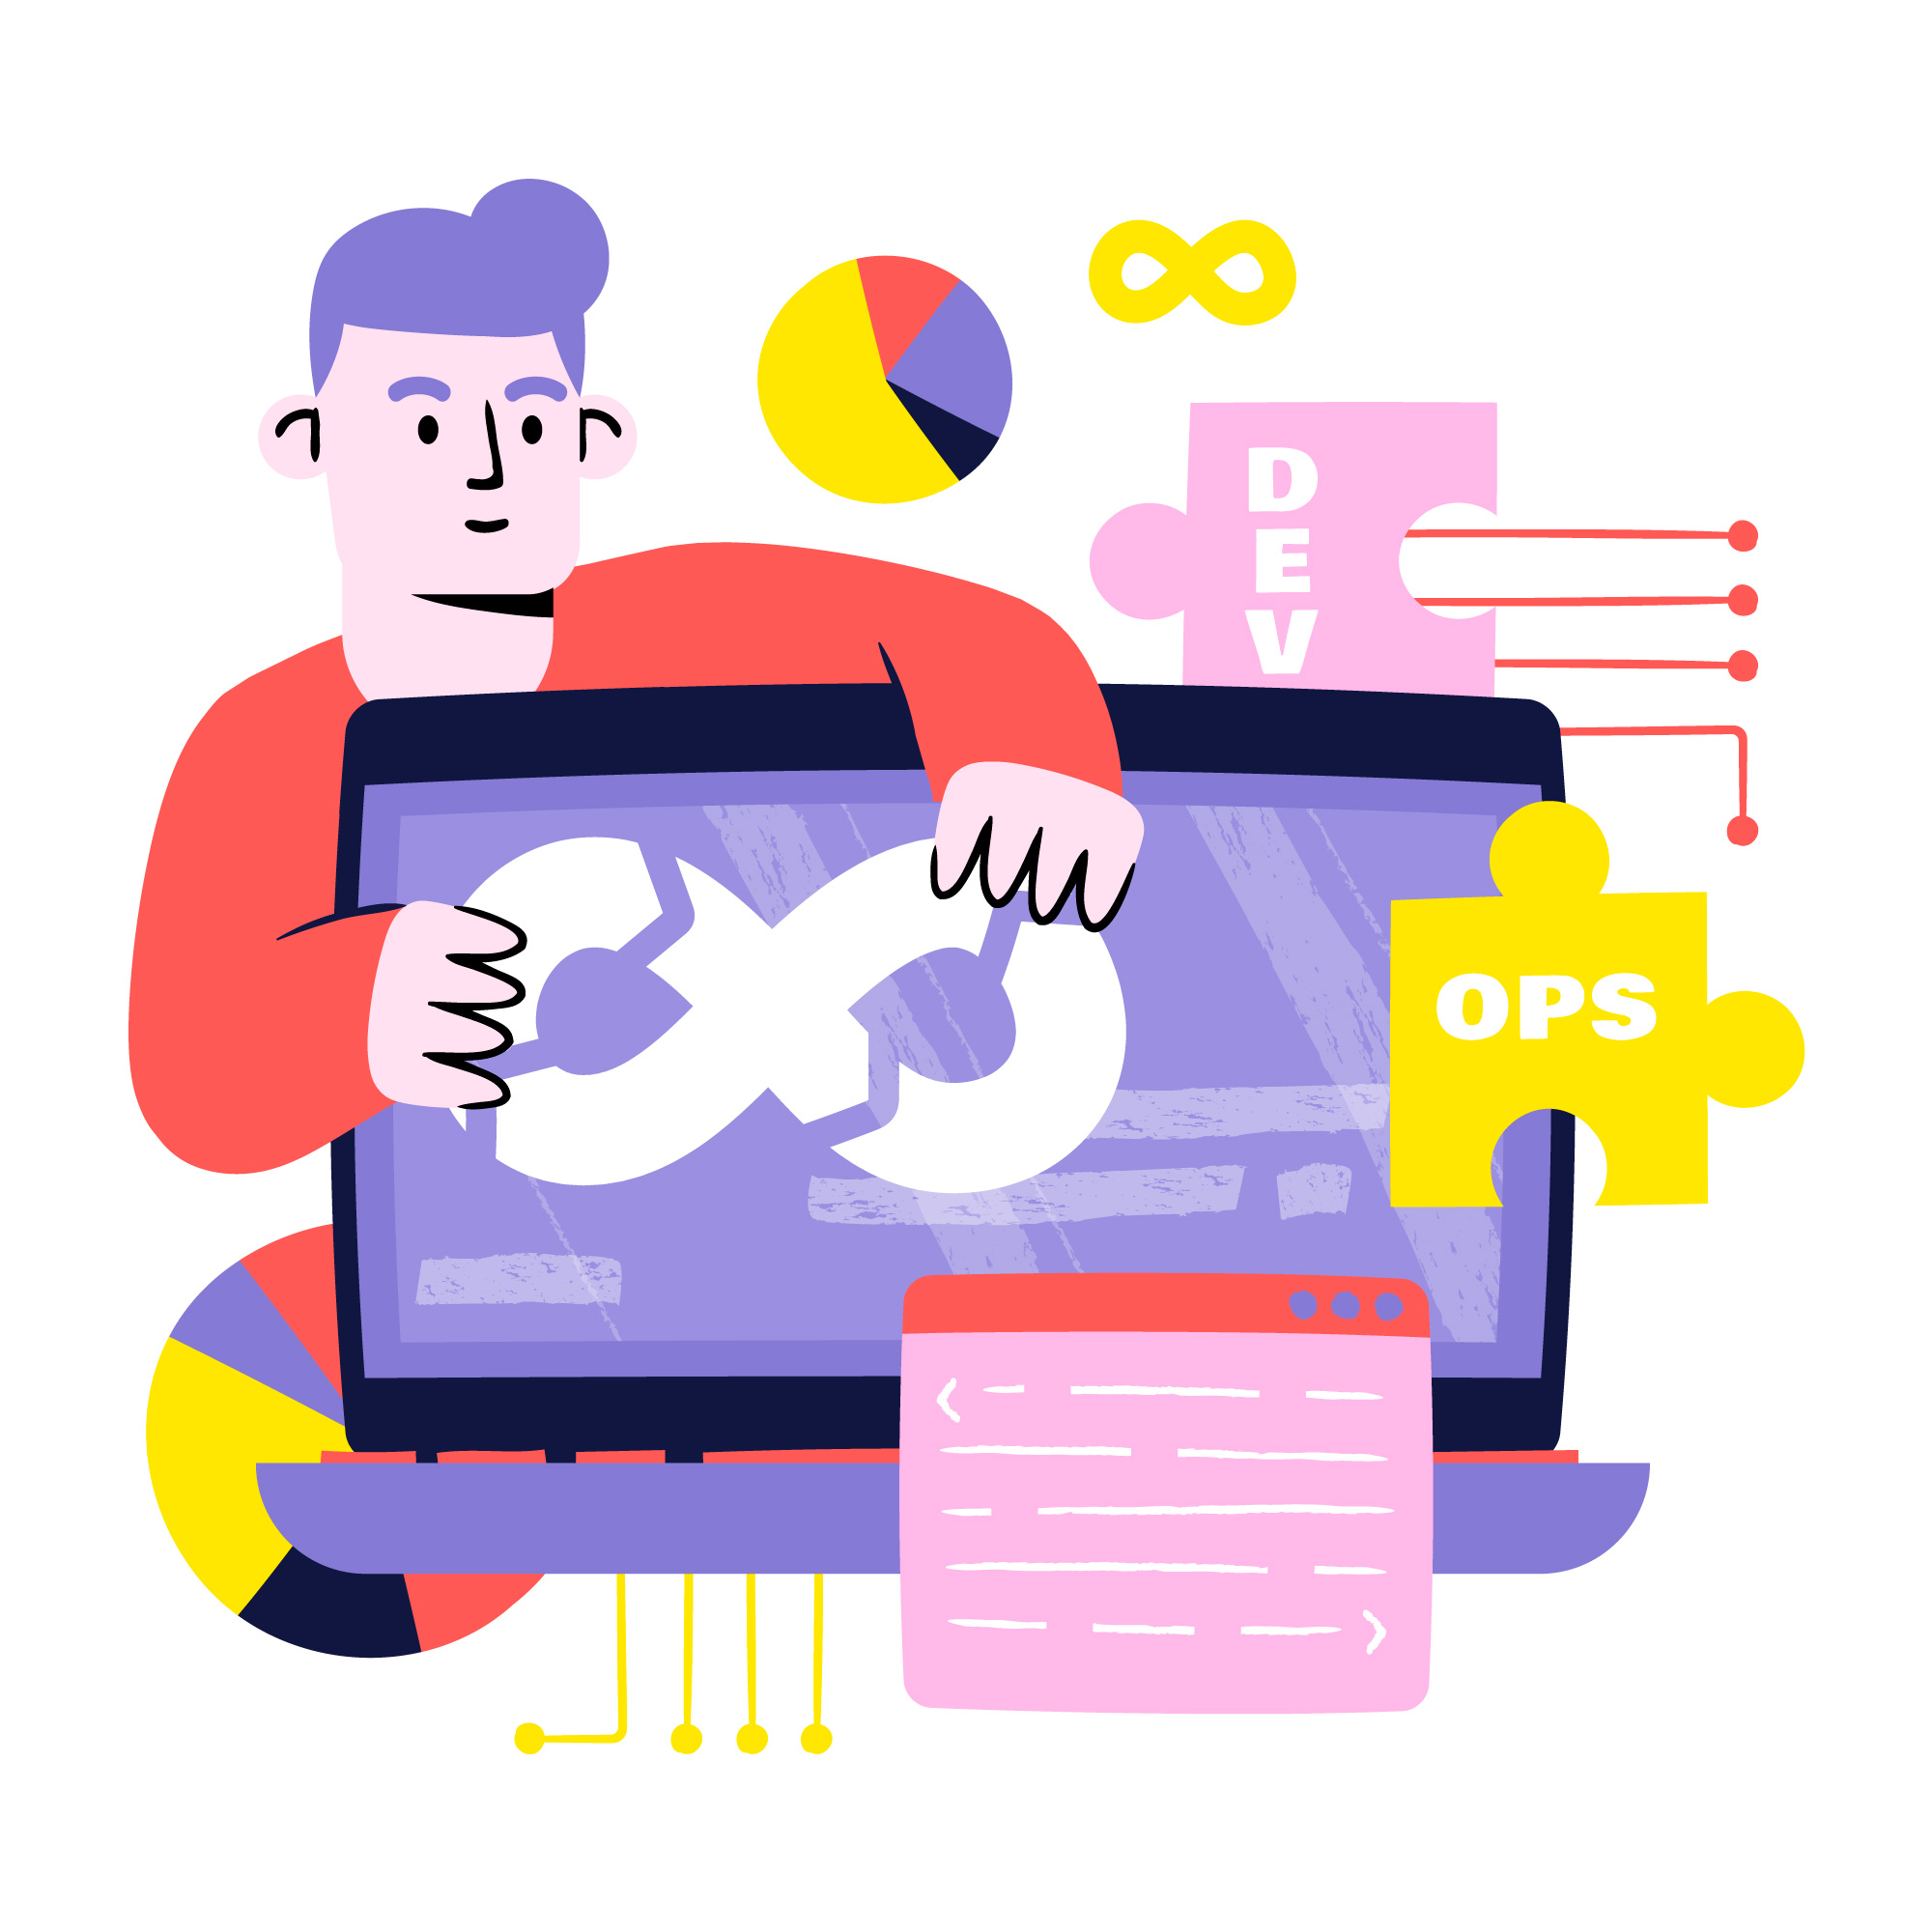 Guide | How To Develop A DevOps Process From Scratch? 